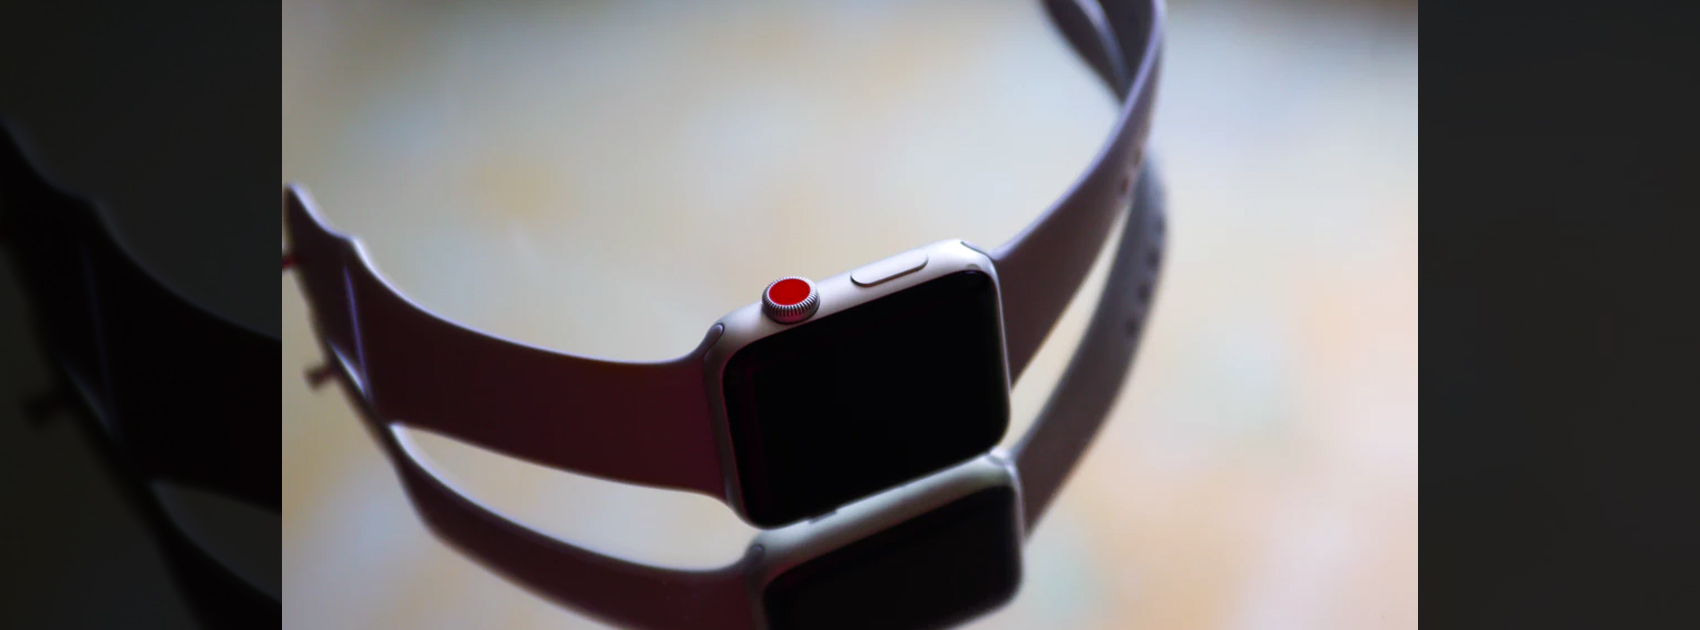 Apple Smart Watch Band,Apple Watch Adjustable Built In-Camera?,Startup Stories,2019 Latest Technology News,Smartwatch Band,Watch Band with Optical Sensor,Apple Watch,Apple Latest News,New Apple Watch,Smart Apple Watch,Apple Smart Watch 2019